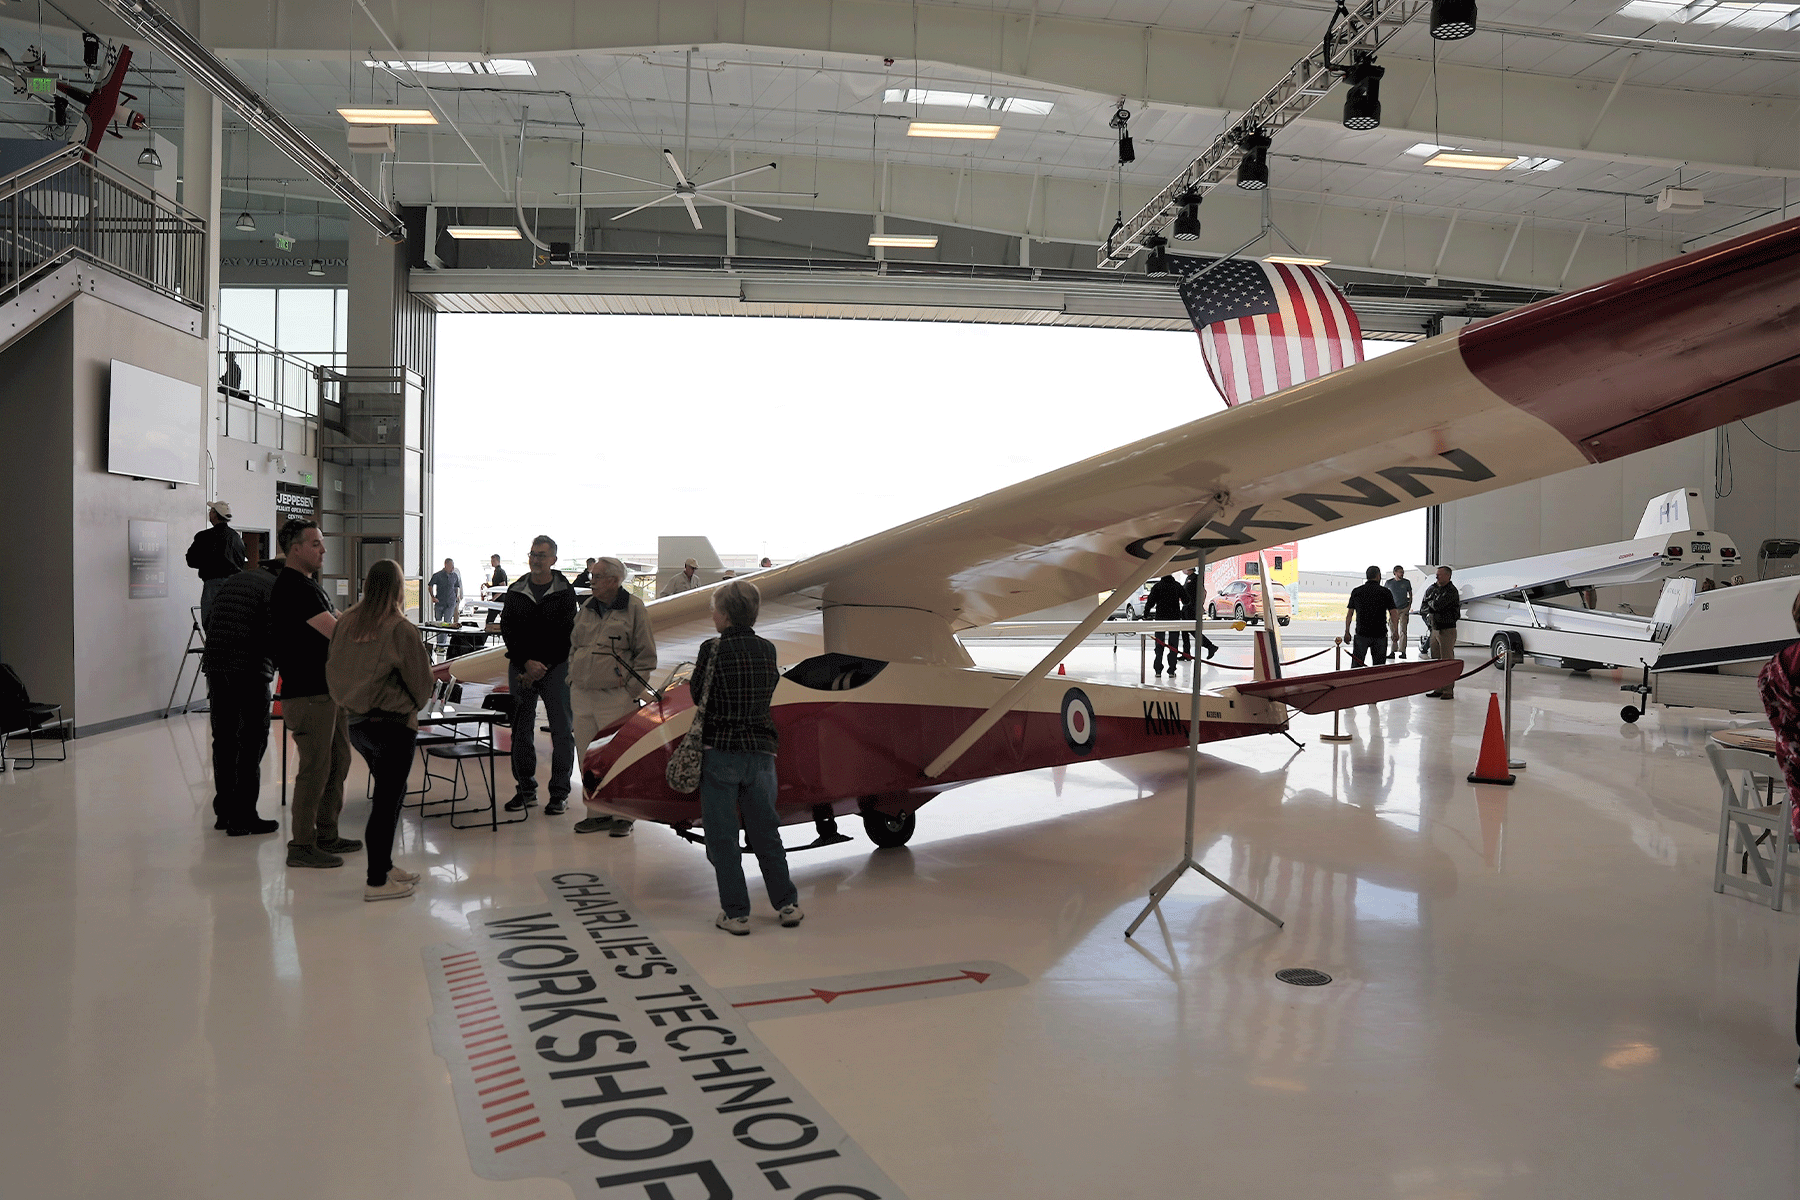 Guests looking at a Glider in the hangar at Exploration of Flight